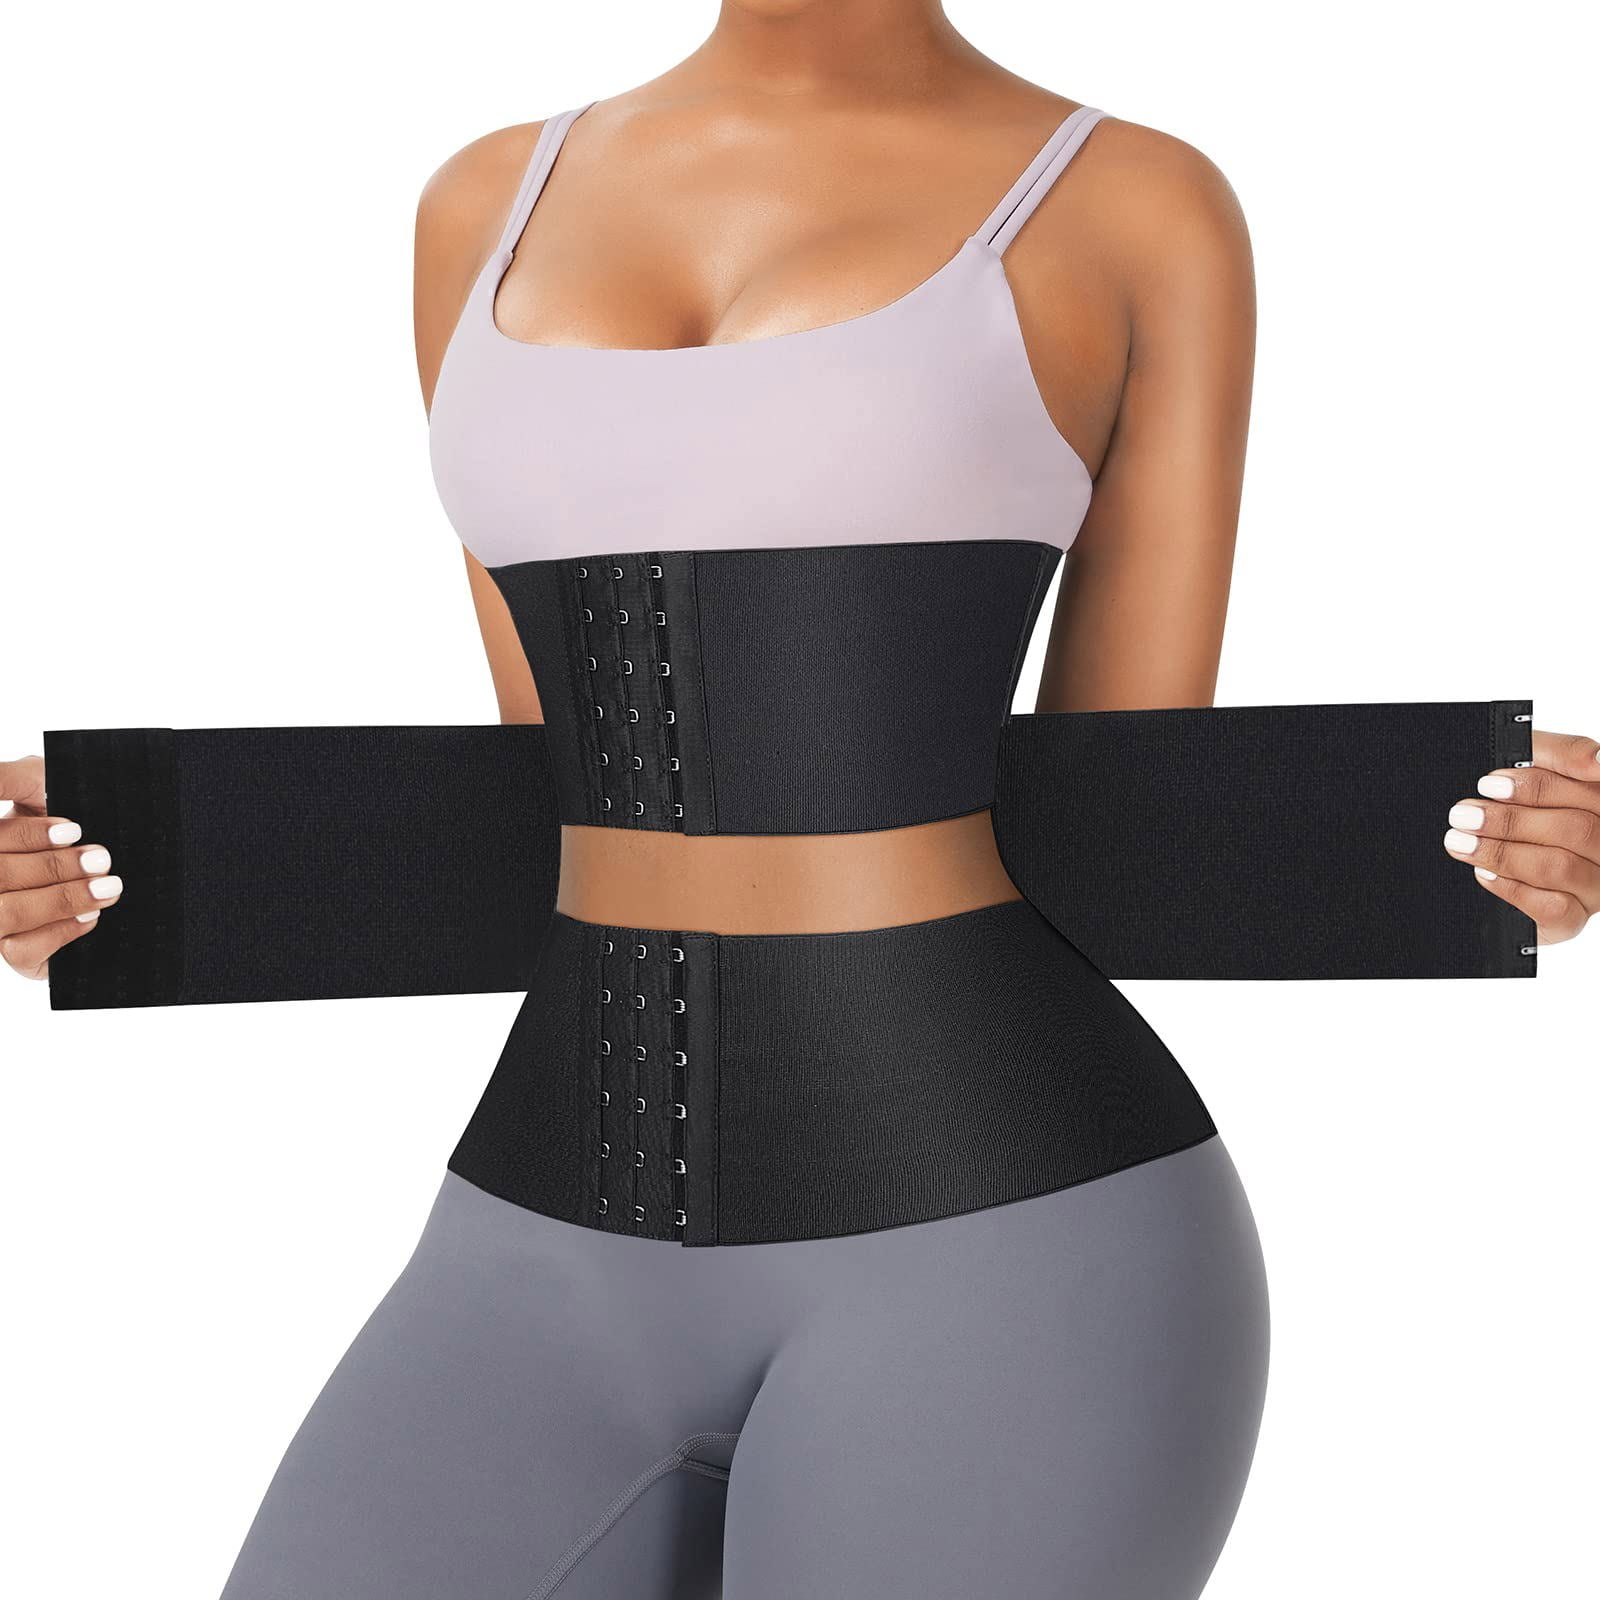 Ann Chery Waist Trainer Belt for Women - Hourglass Shaper for Tummy  Control, Belly Trimmer - Adjustable Sport Band Cincher (Black, 2X-Small) at   Women's Clothing store